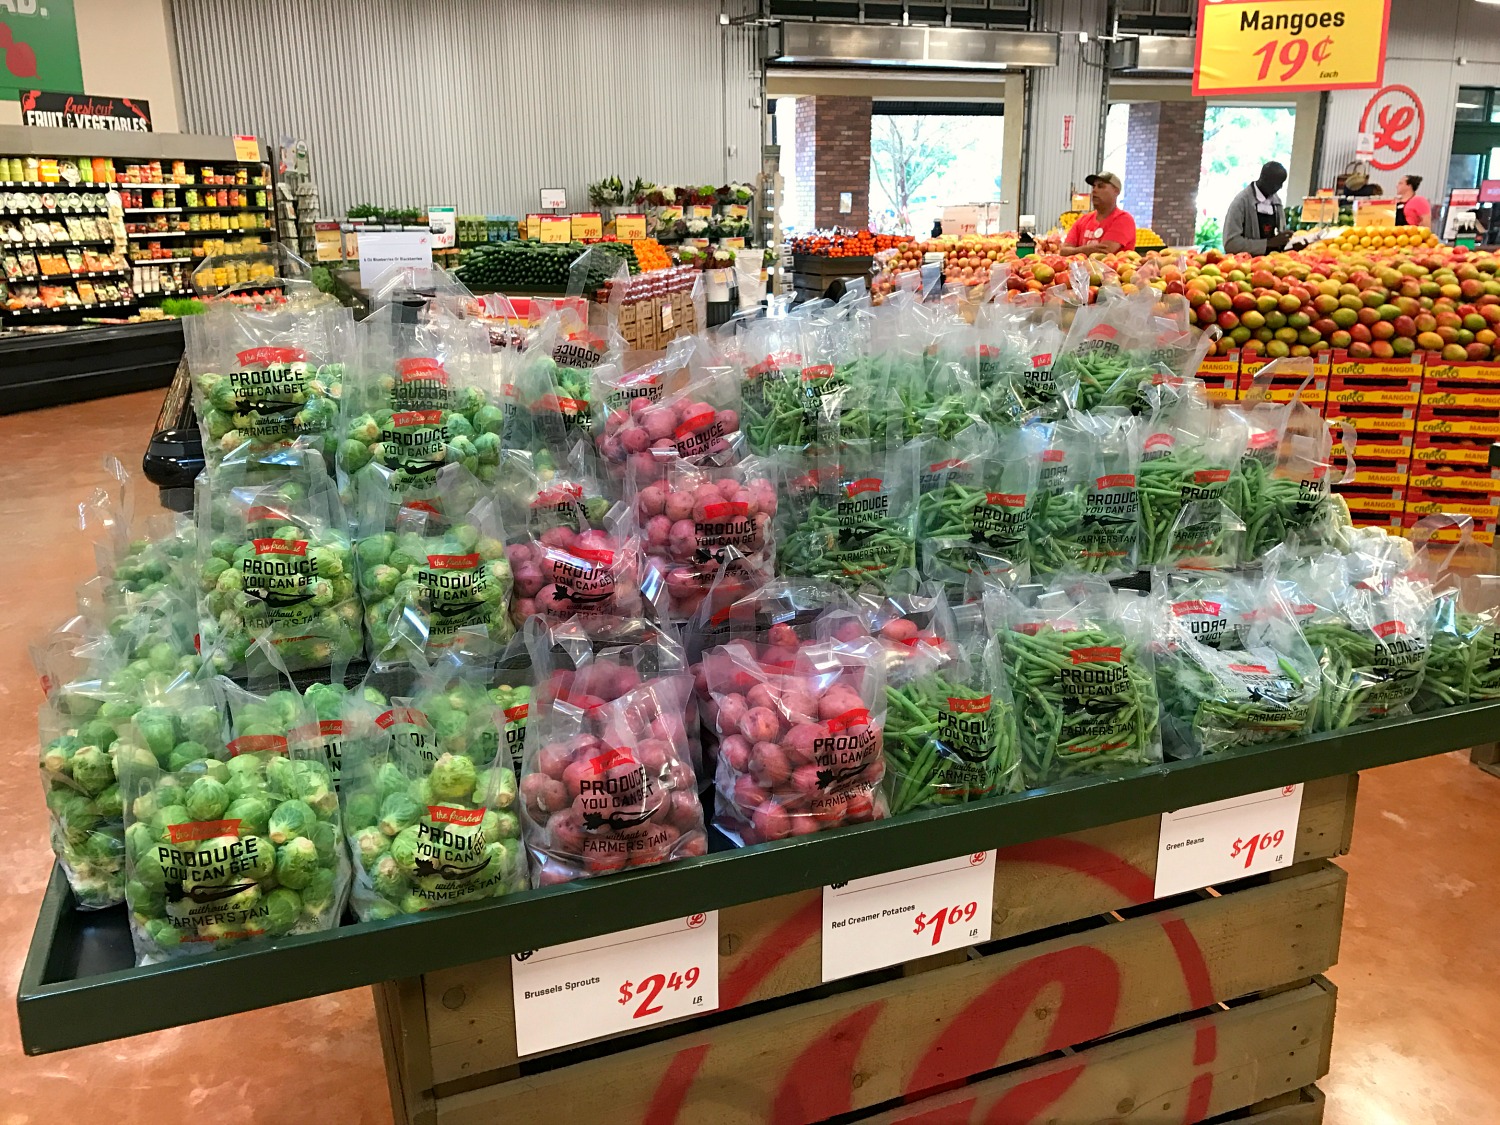 Looking for natural and organic food at affordable prices? Then check out Lucky's Market in Plantation, it's every foodie's dream!